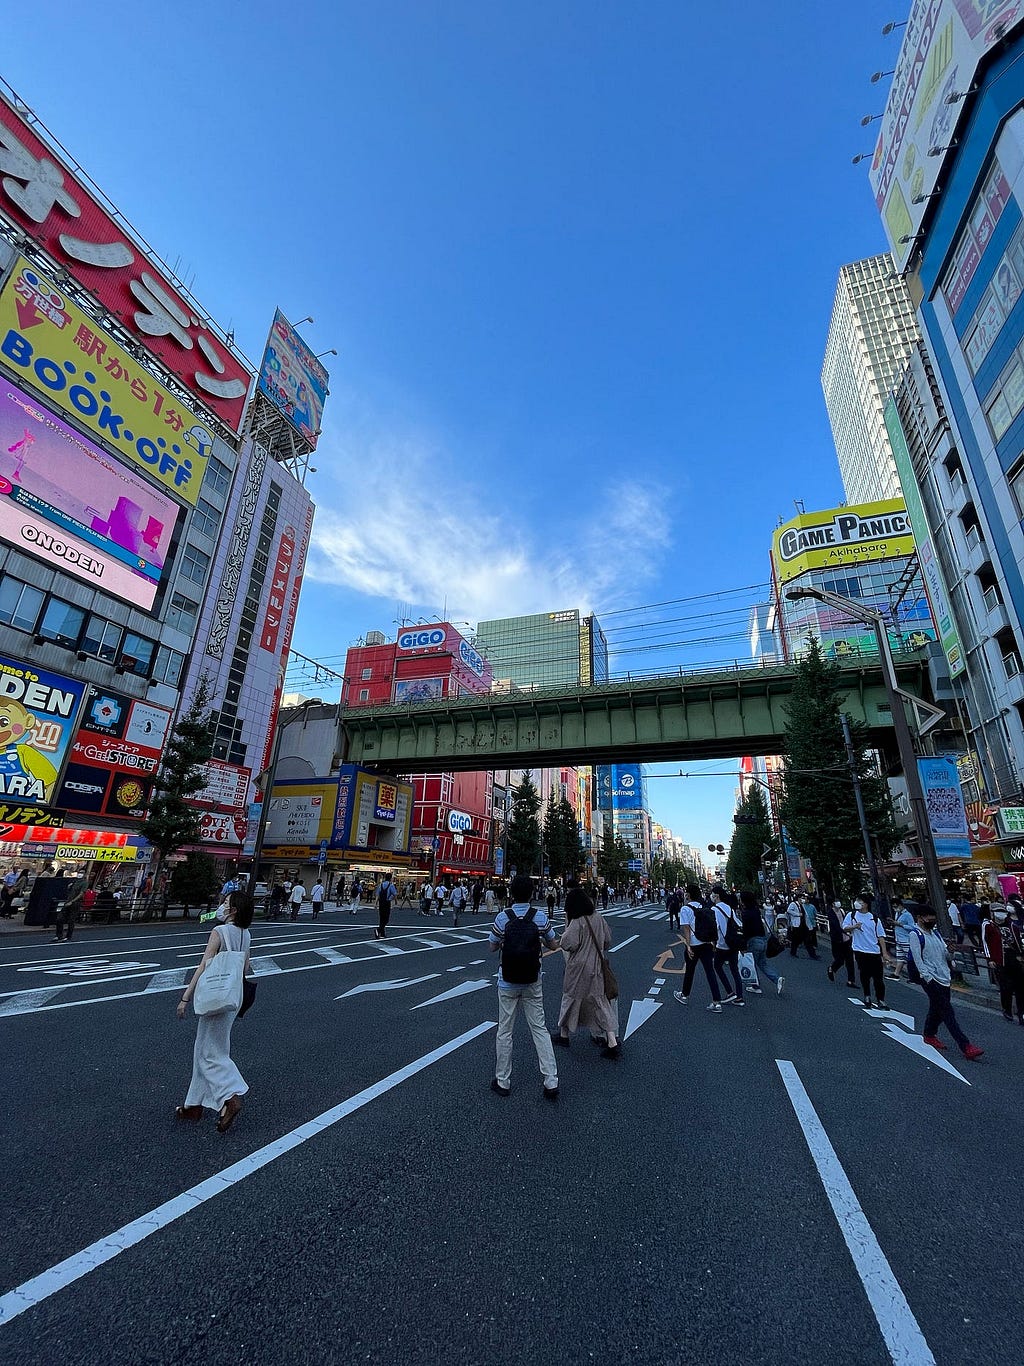 I personally love Akihabara’s pedestrian paradise, where people from various countries come together.